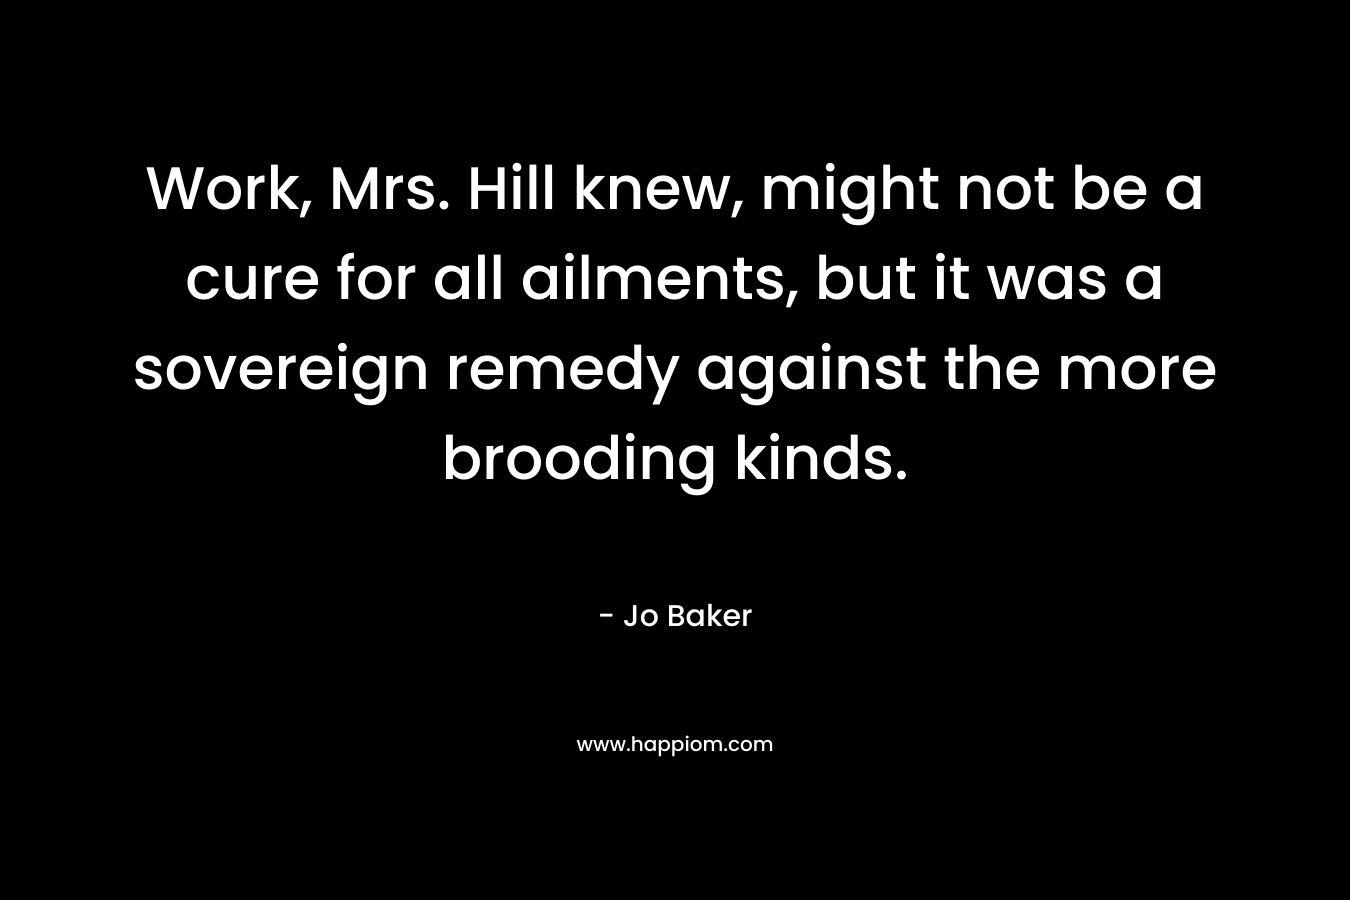 Work, Mrs. Hill knew, might not be a cure for all ailments, but it was a sovereign remedy against the more brooding kinds. – Jo Baker